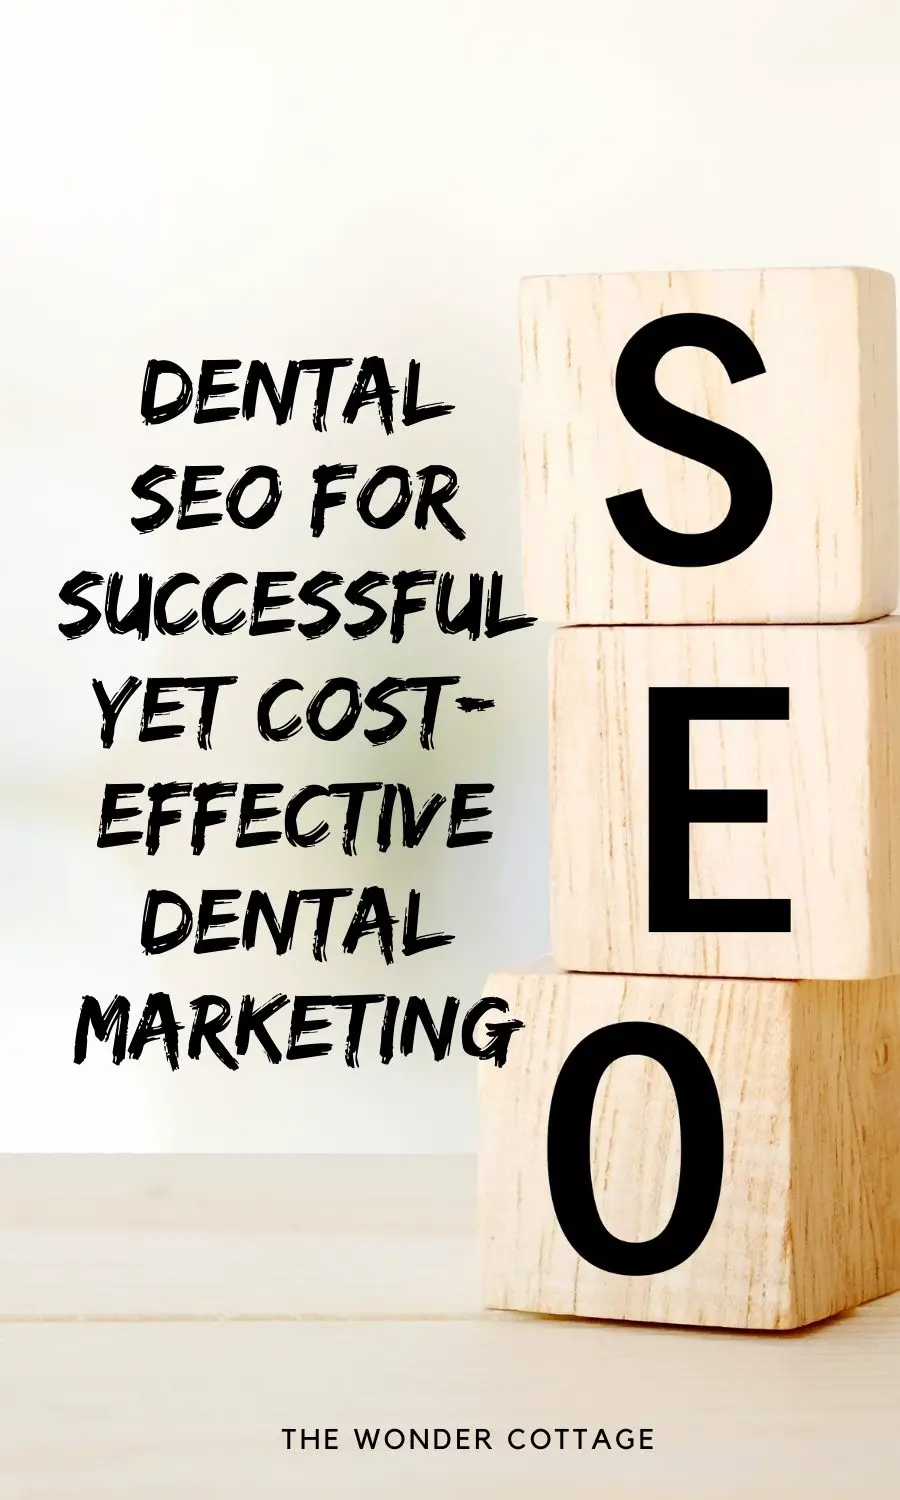 Dental SEO For Successful Yet Cost-Effective Dental Marketing